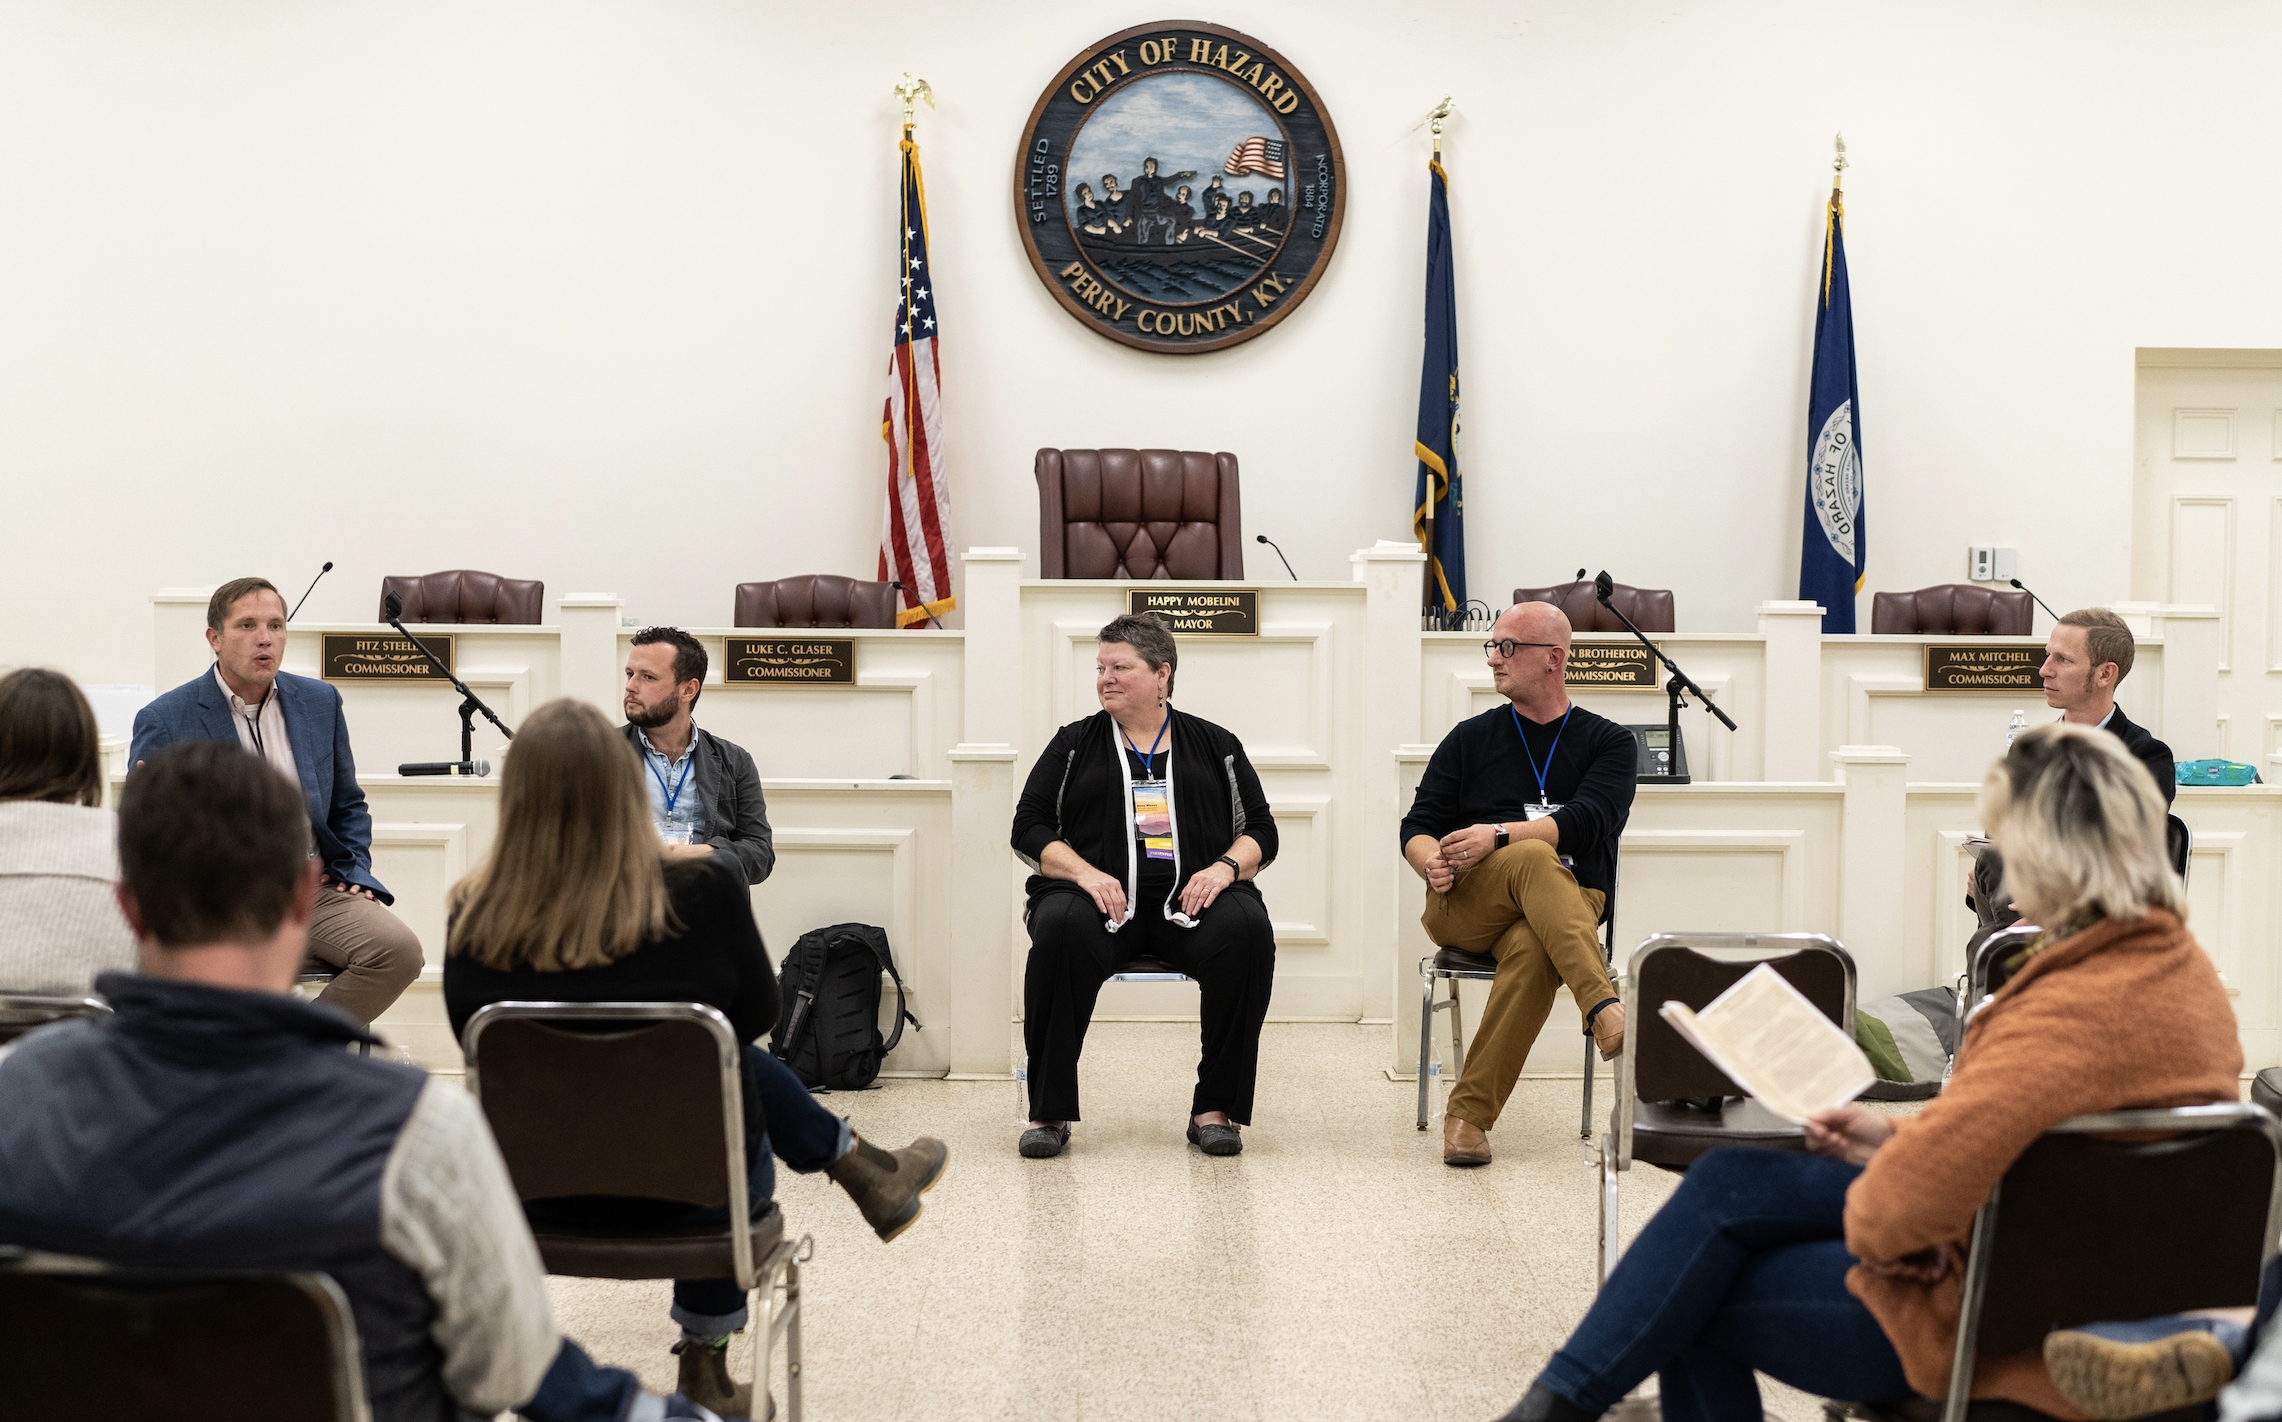 IA speaks on the Impact Investing Roundtable Discussion at the Appalachian Big Ideas Fest in Hazard, KY